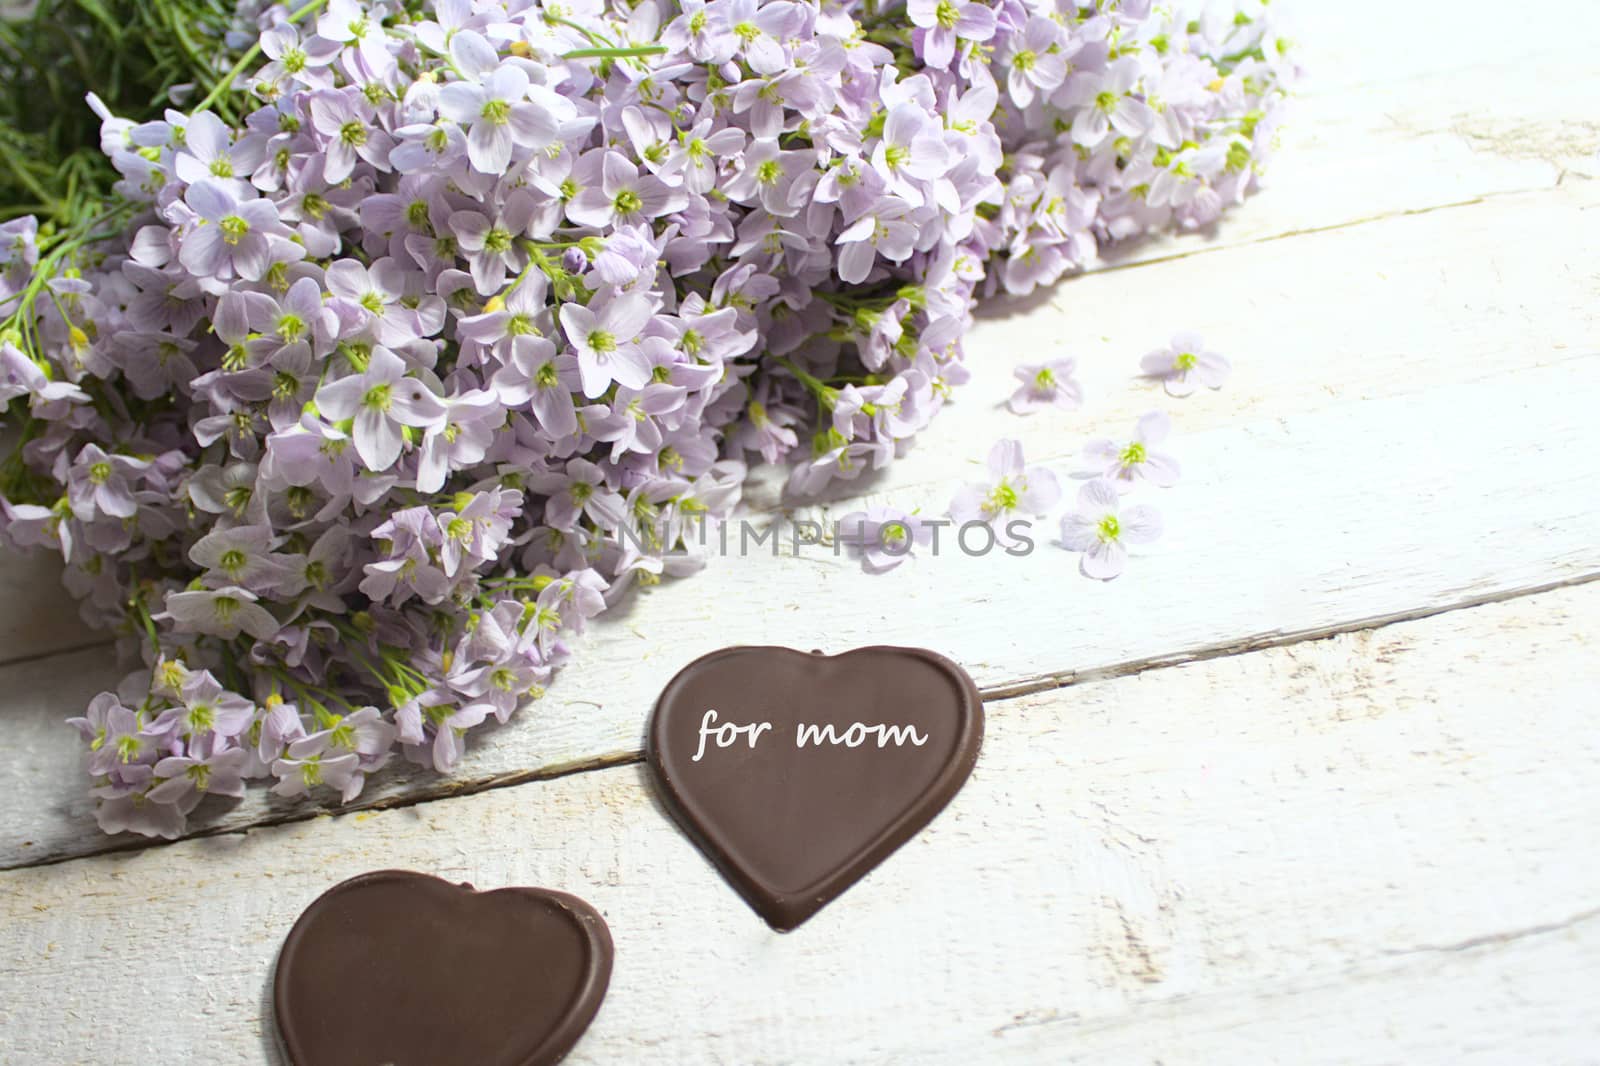 The picture shows cuckoo flowers and chocolate hearts